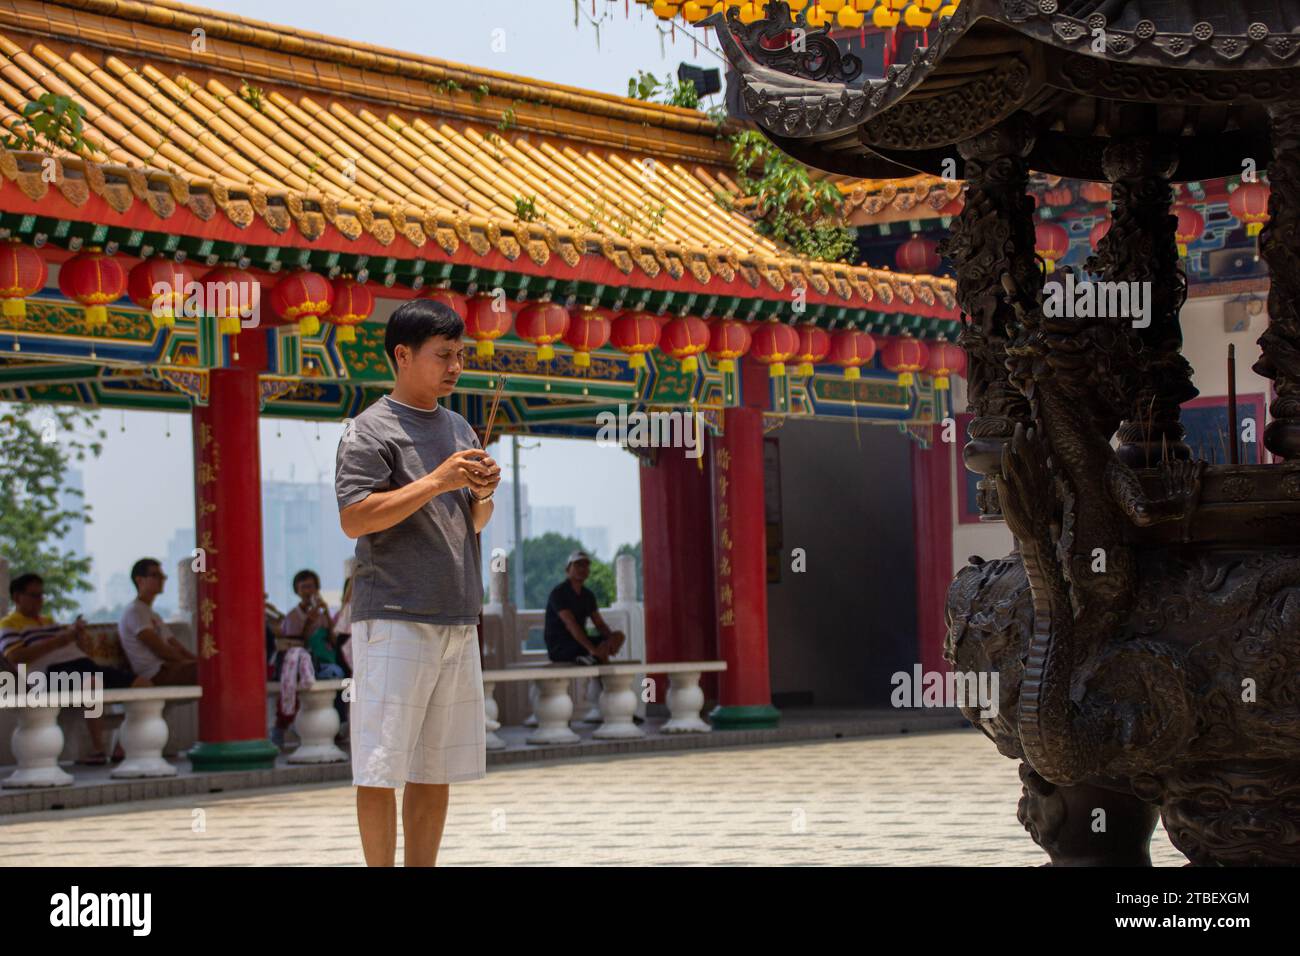 A person praying with incenses at the Thean Hou Temple,  one of the largest and oldest Buddhist temples in Southeast Asia at Kuala Lumpur, Malaysia Stock Photo